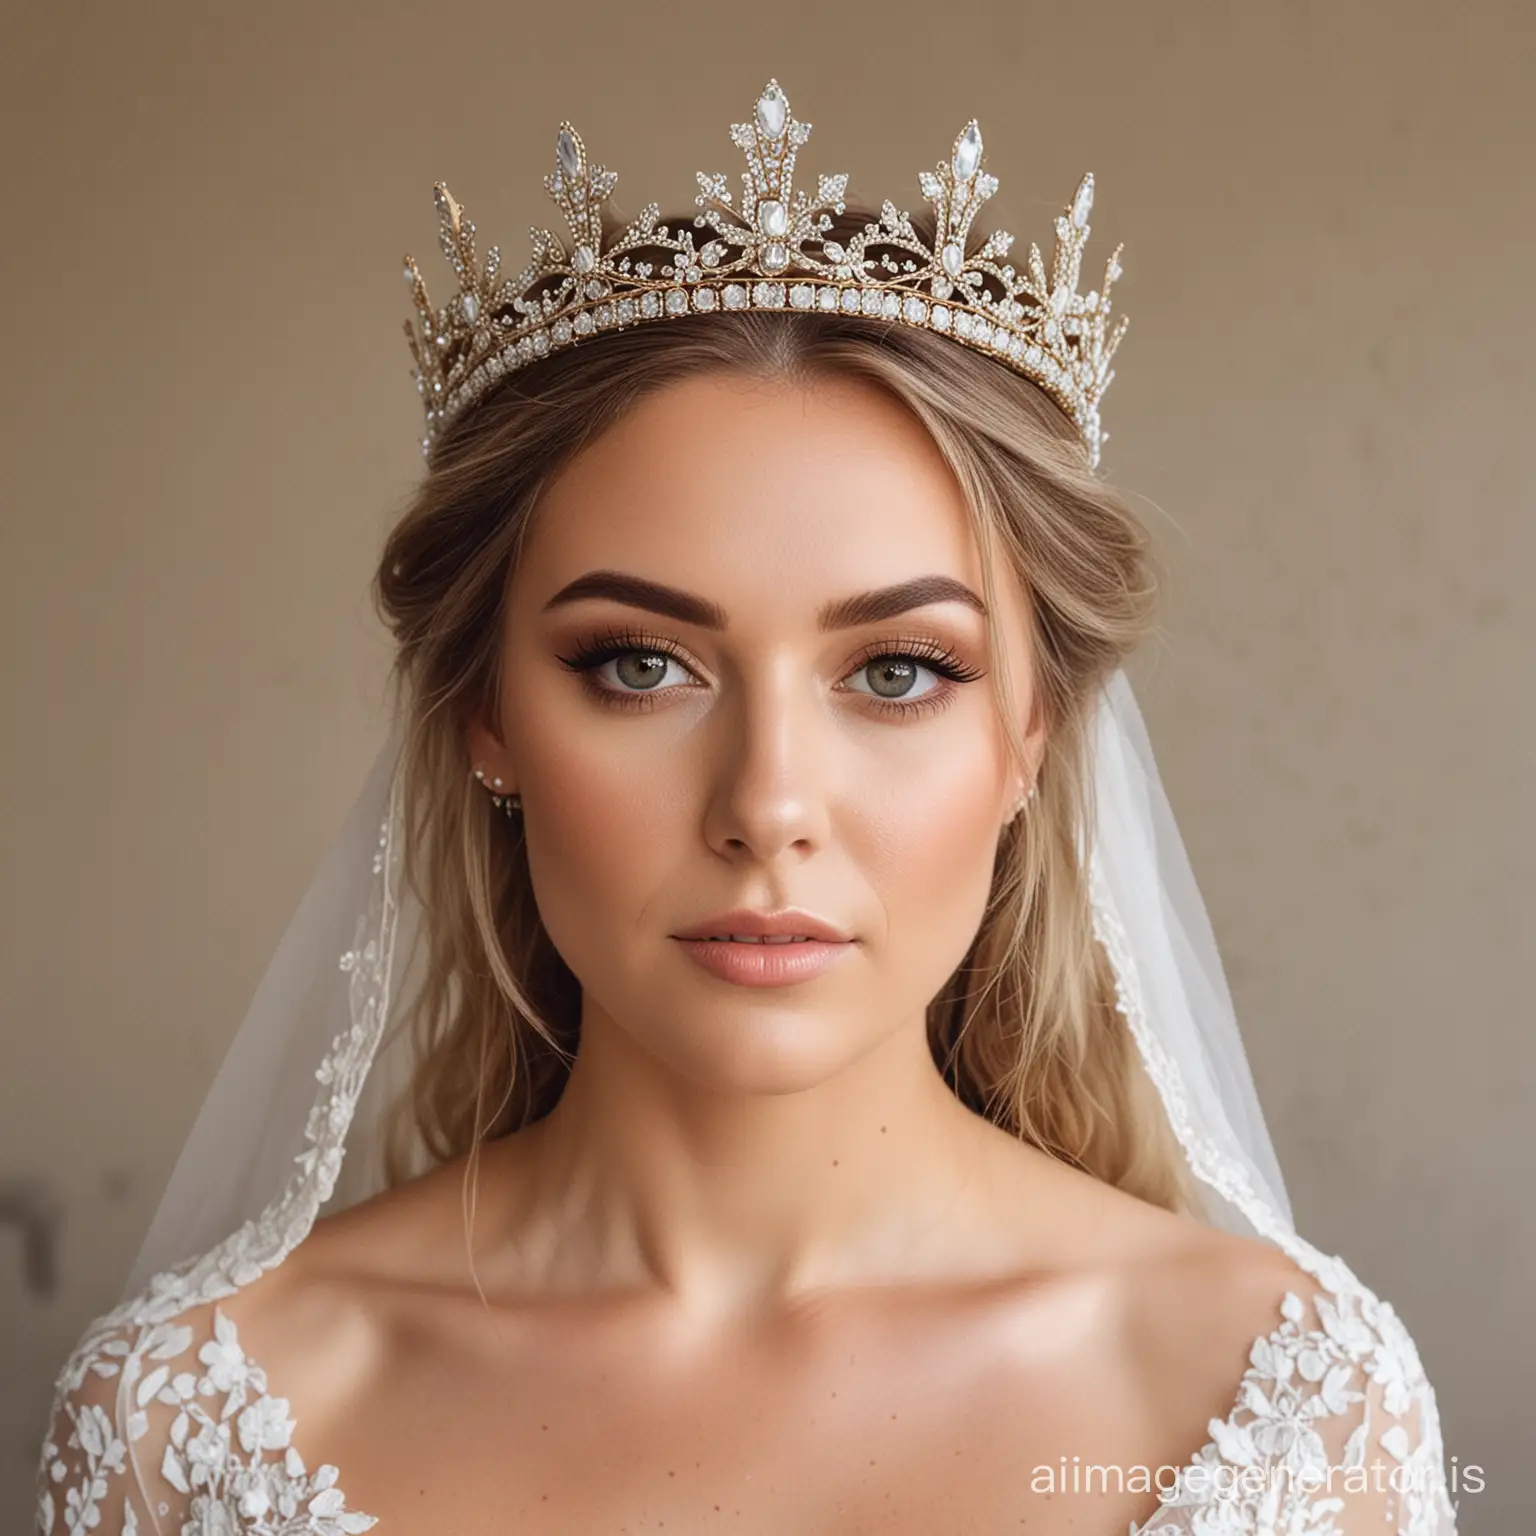 A bride wearing light makeup and wearing a crown